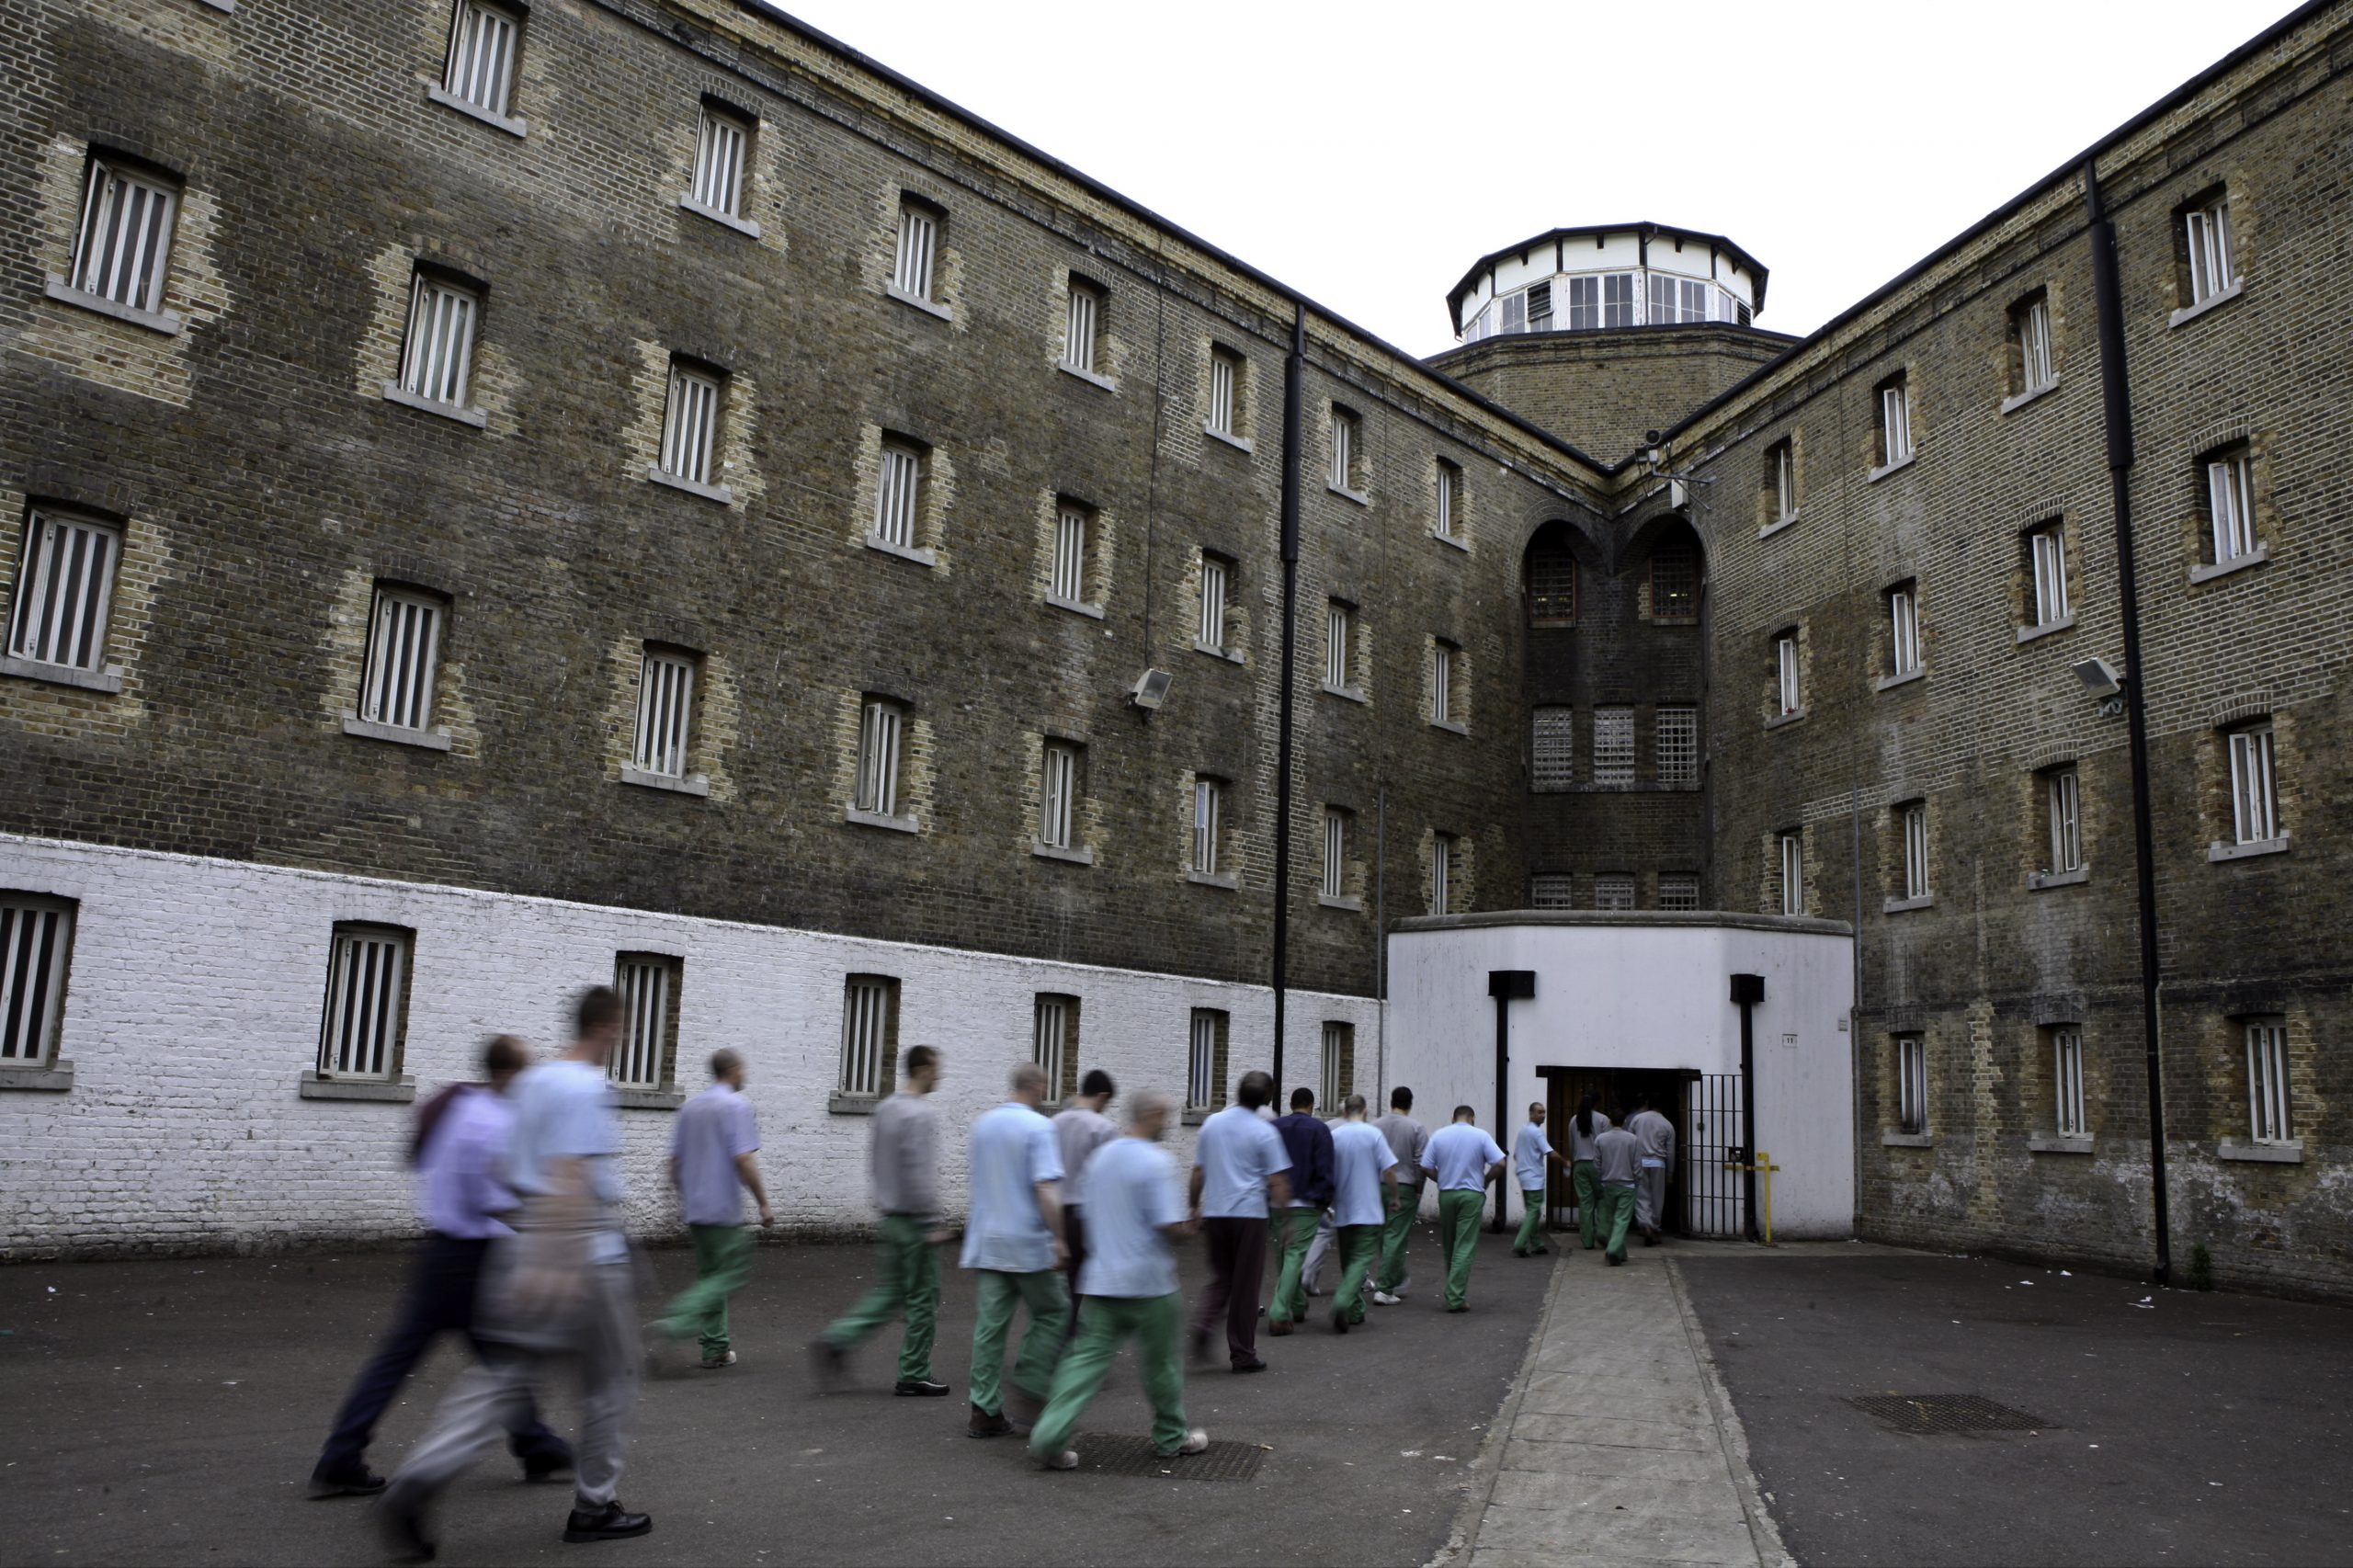 Chief Prison Inspector laments prisoners left to “languish” in overcrowded cells